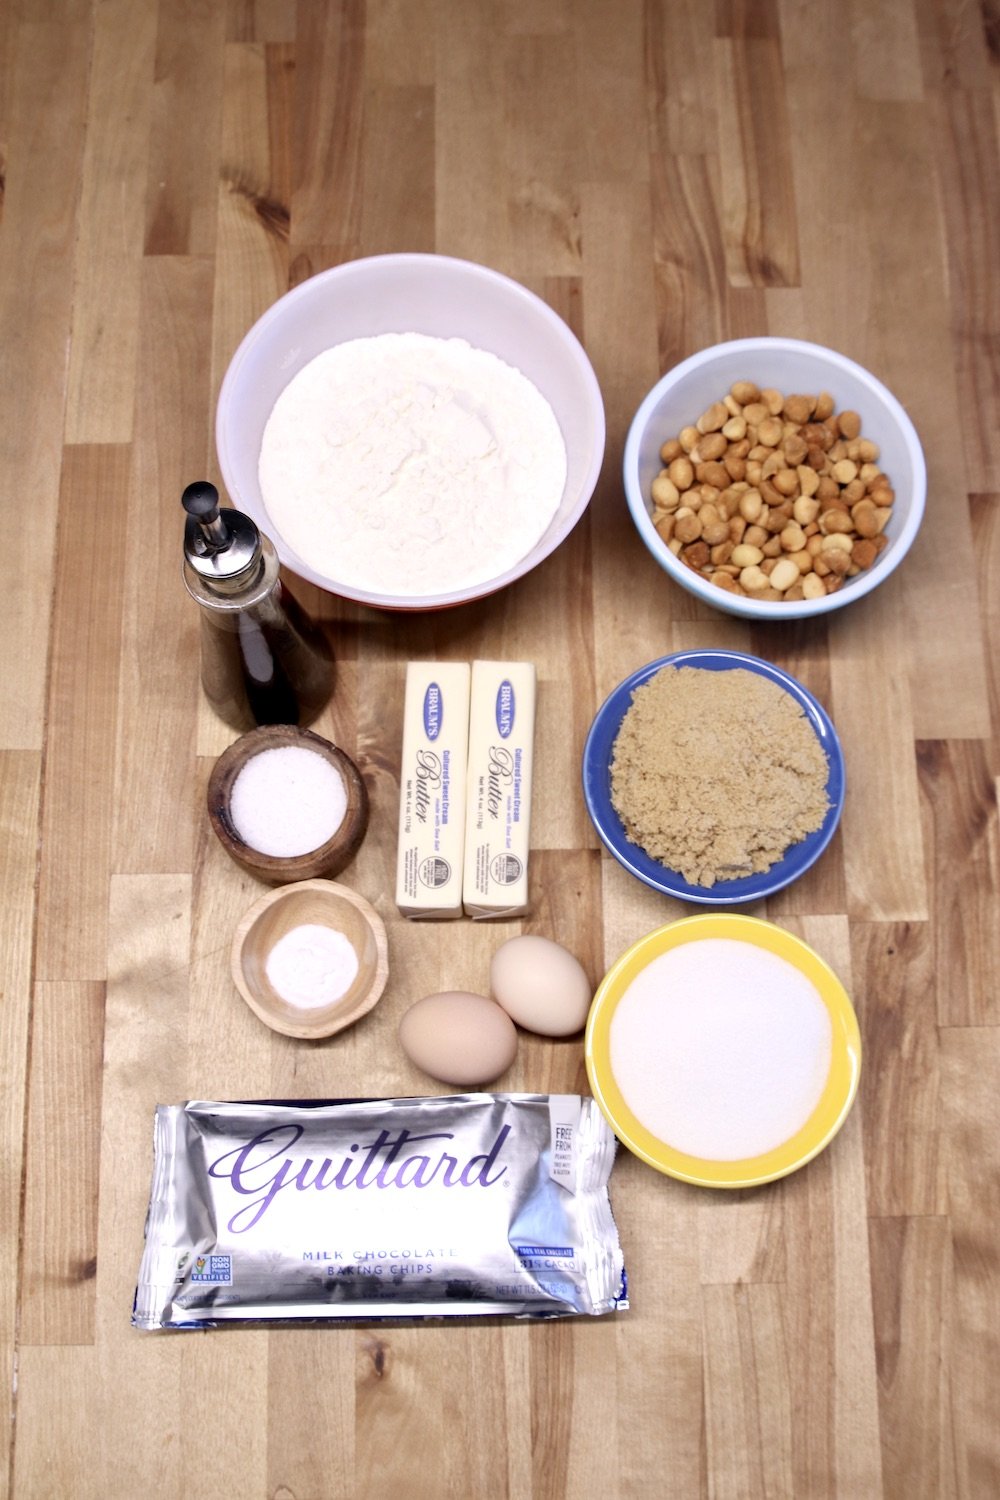 Ingredients for macadamia nut chocolate chip cookies